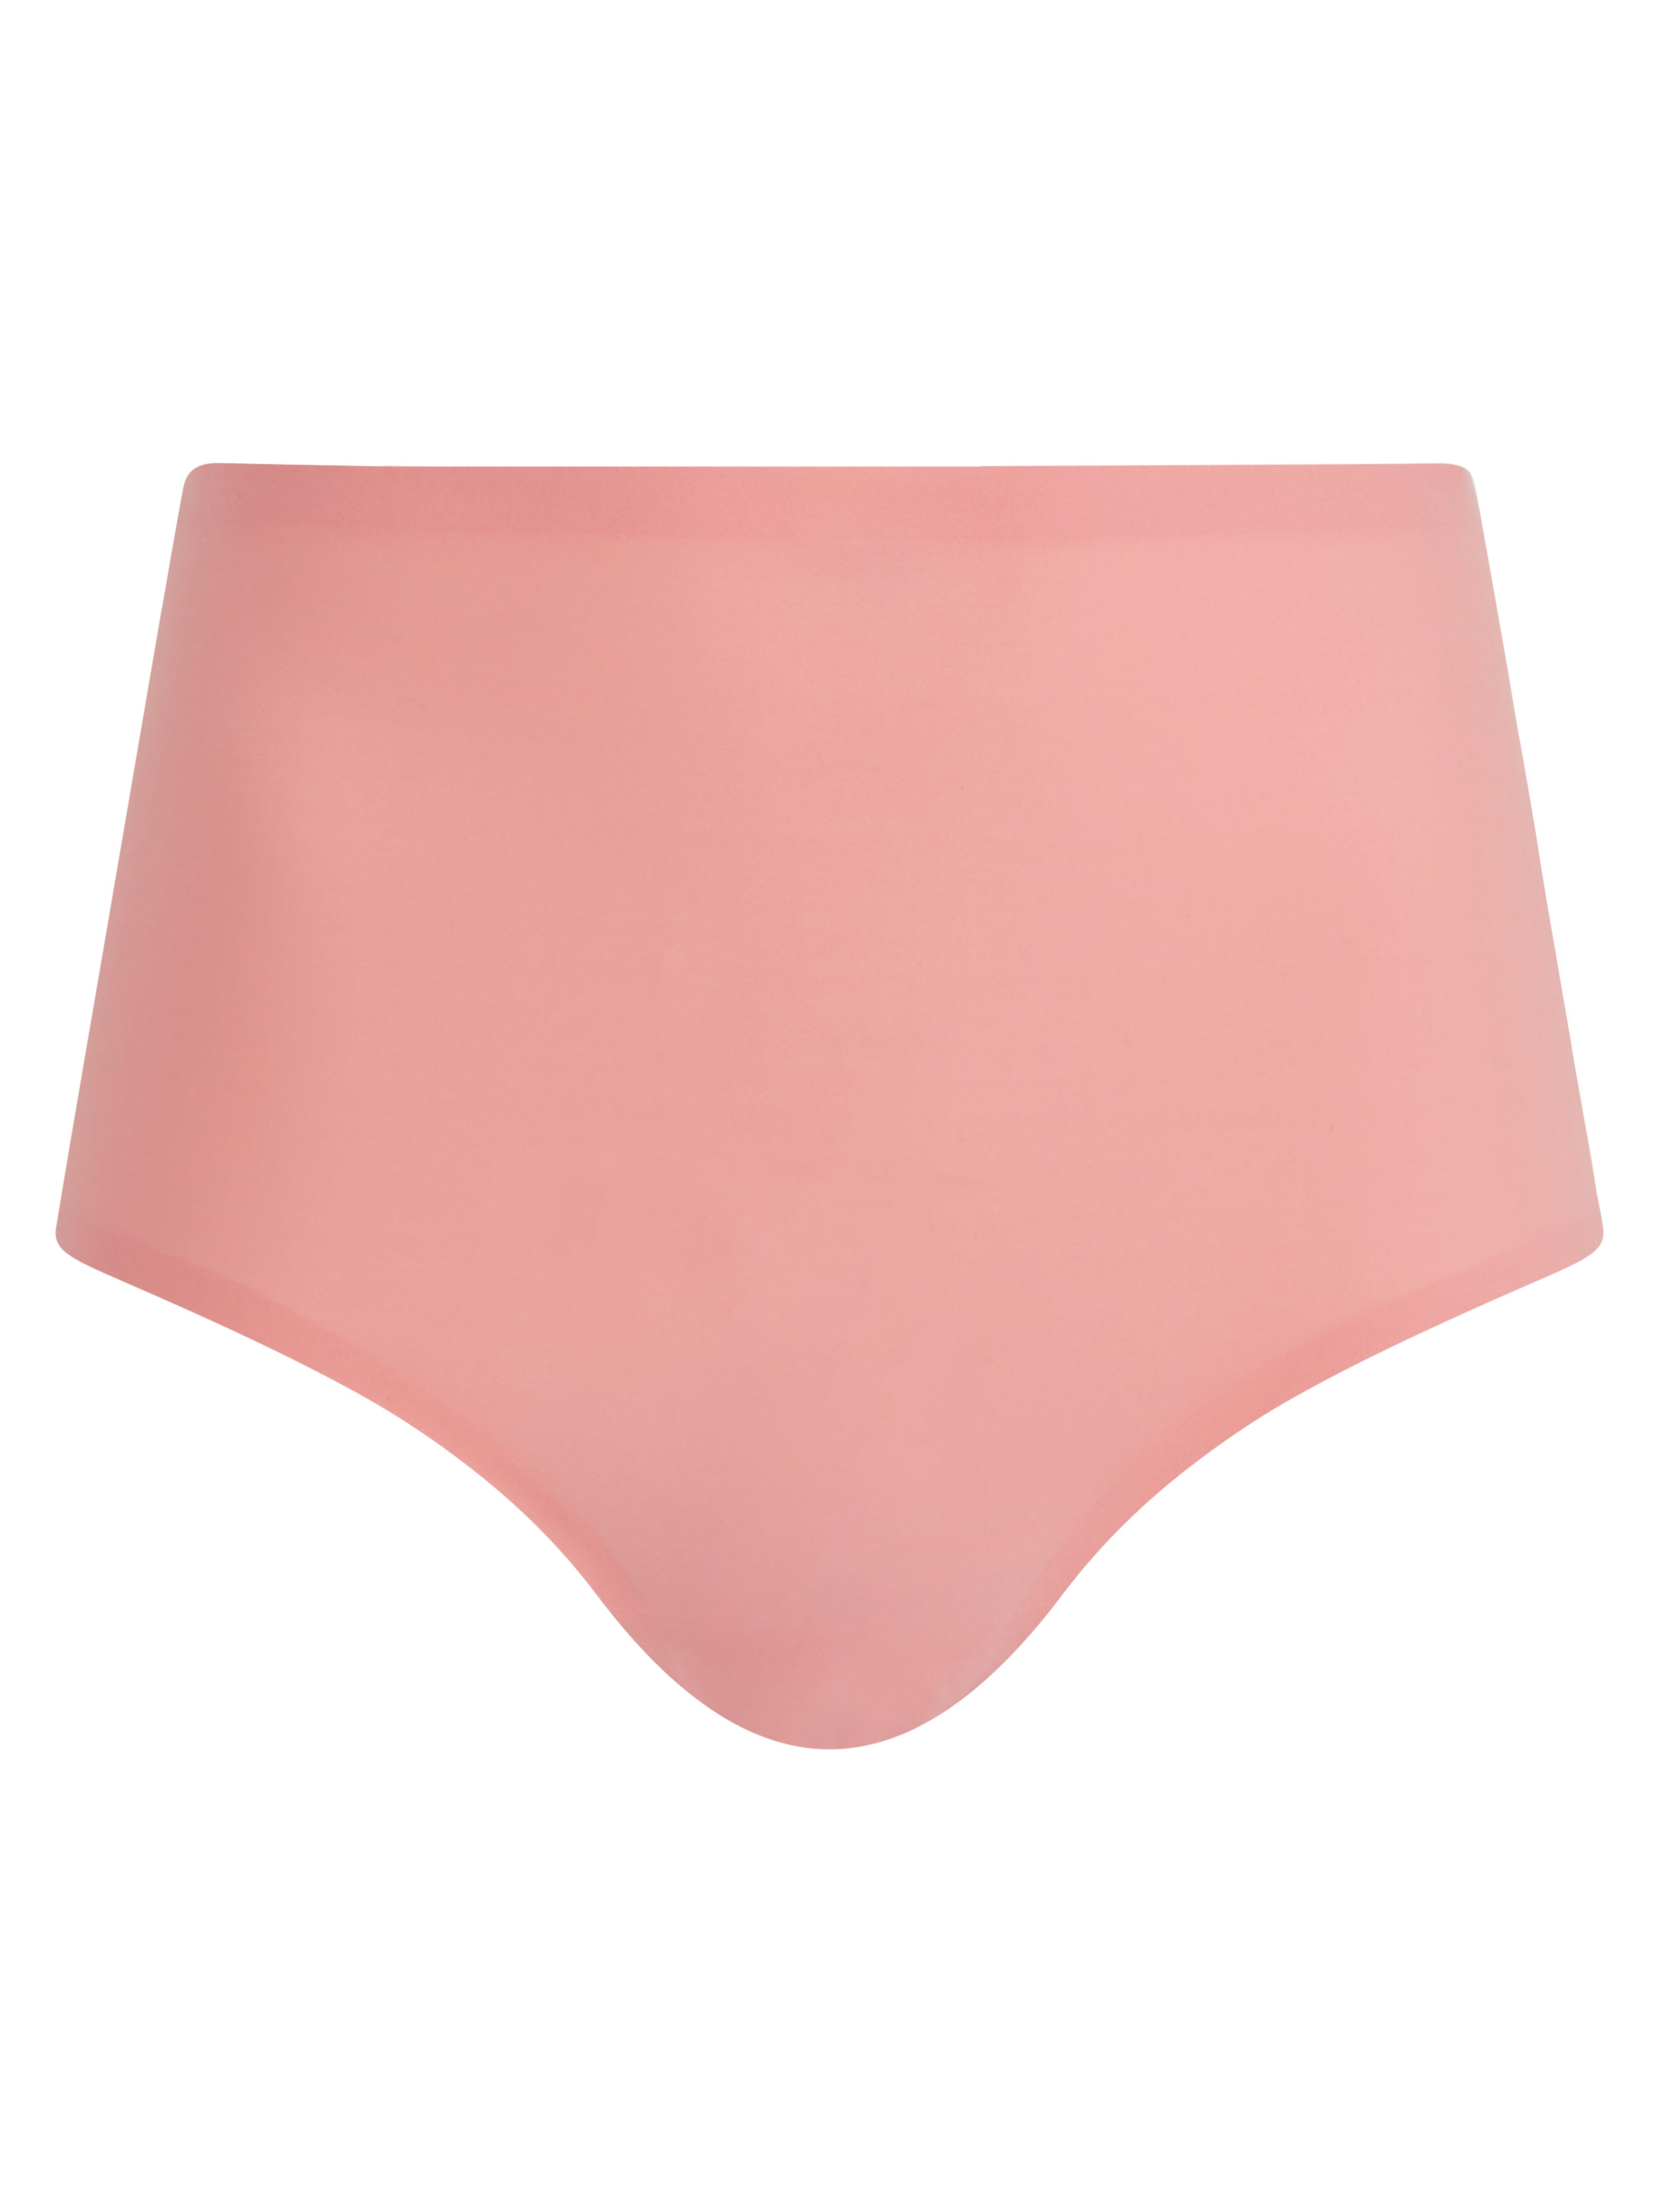 Chantelle Soft Stretch One Size Full Brief - Plus